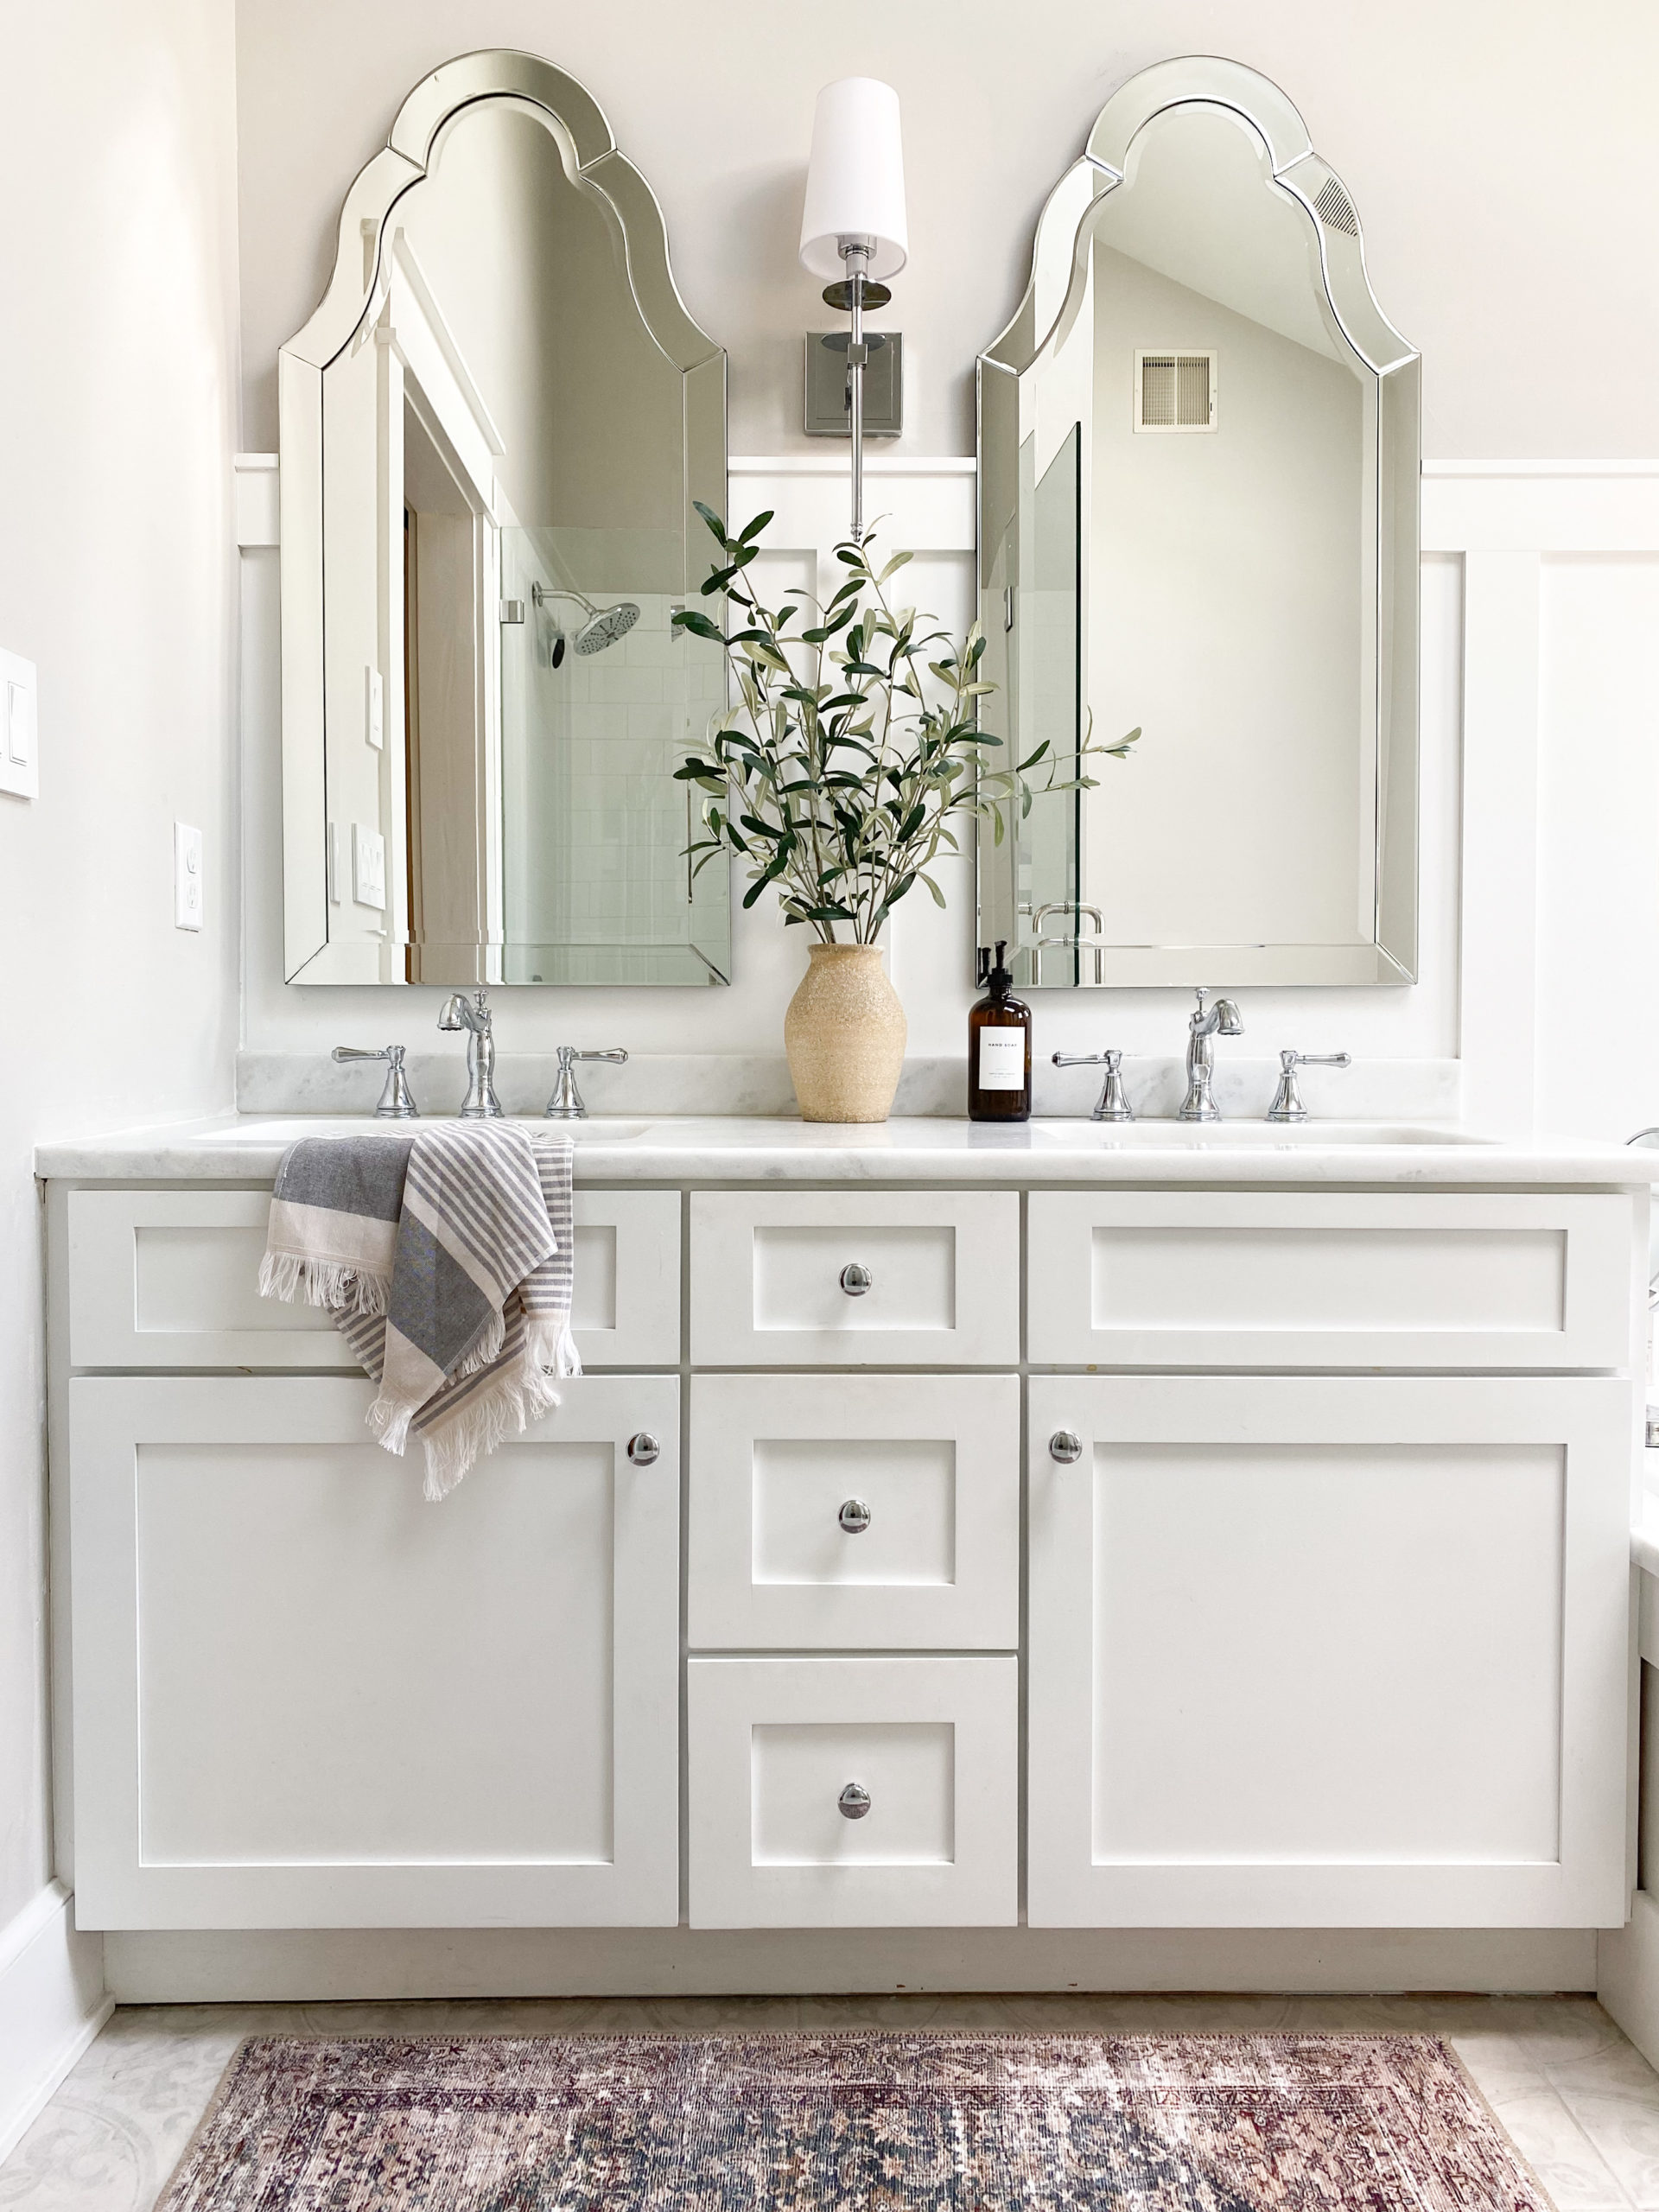 Sherwin Williams High Reflective White painted vanity, marble look quartz countertop, board and batten, arched mirrors, On the Rocks Sherwin. Kylie M Interiors Edesign